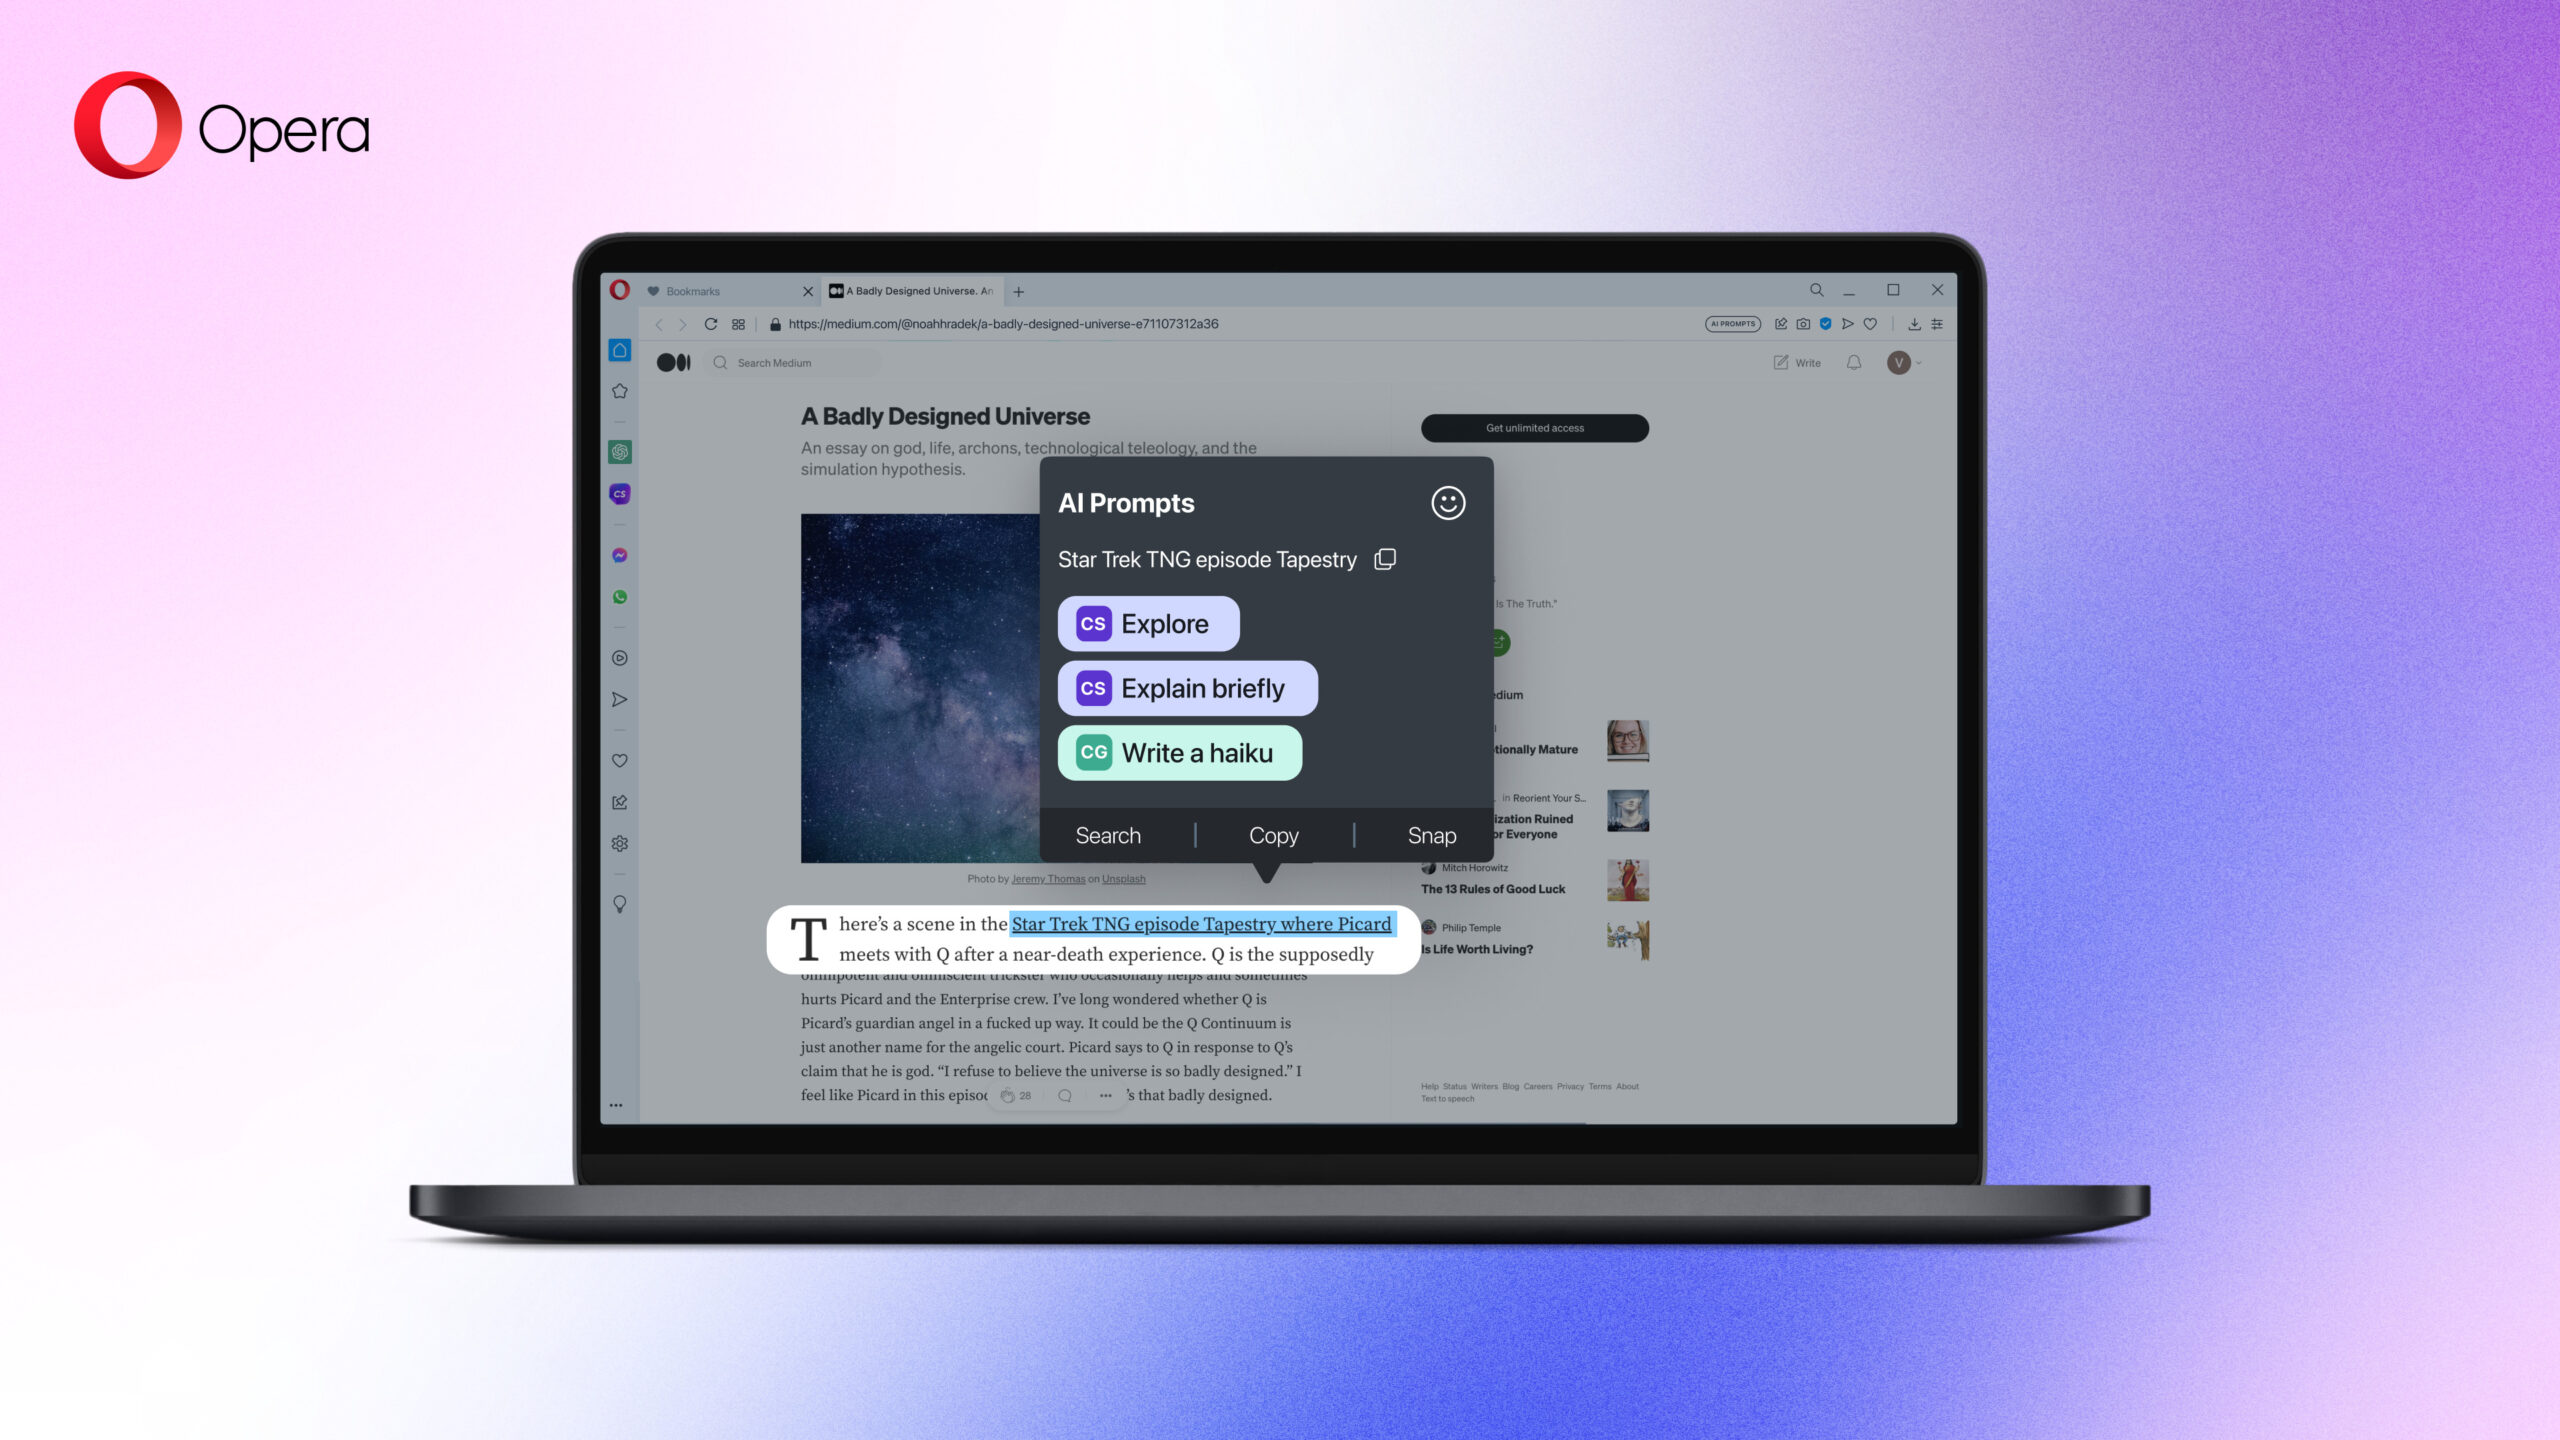 The AI Prompts feature presented in the Opera browser. It brings contextual browser prompts to a new level and lets you use AI to explore content on the Web.